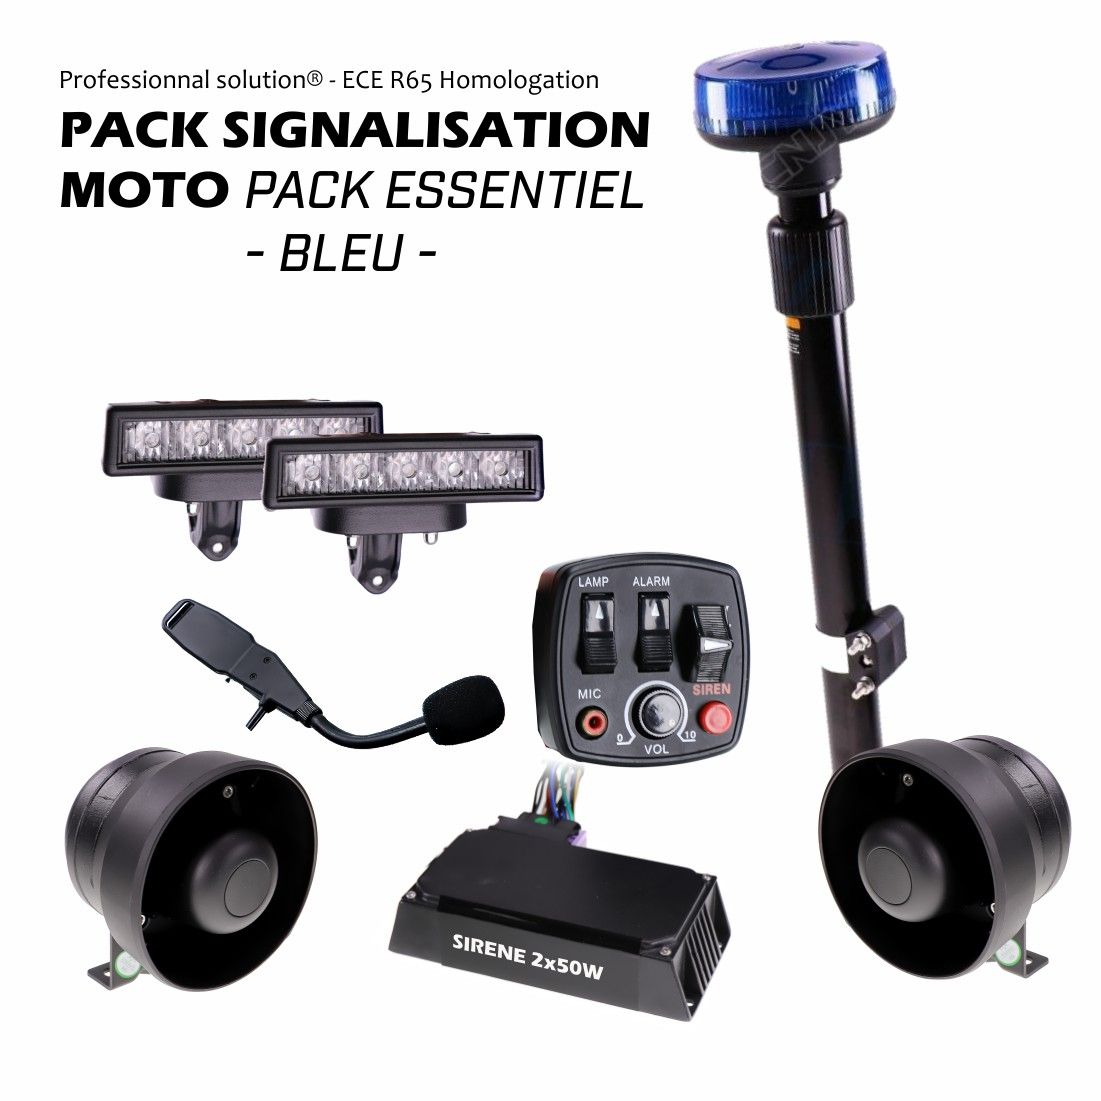 PACK SIGNALISATION PRO FEUX A ECLAT LED, GYROPHARE MAT